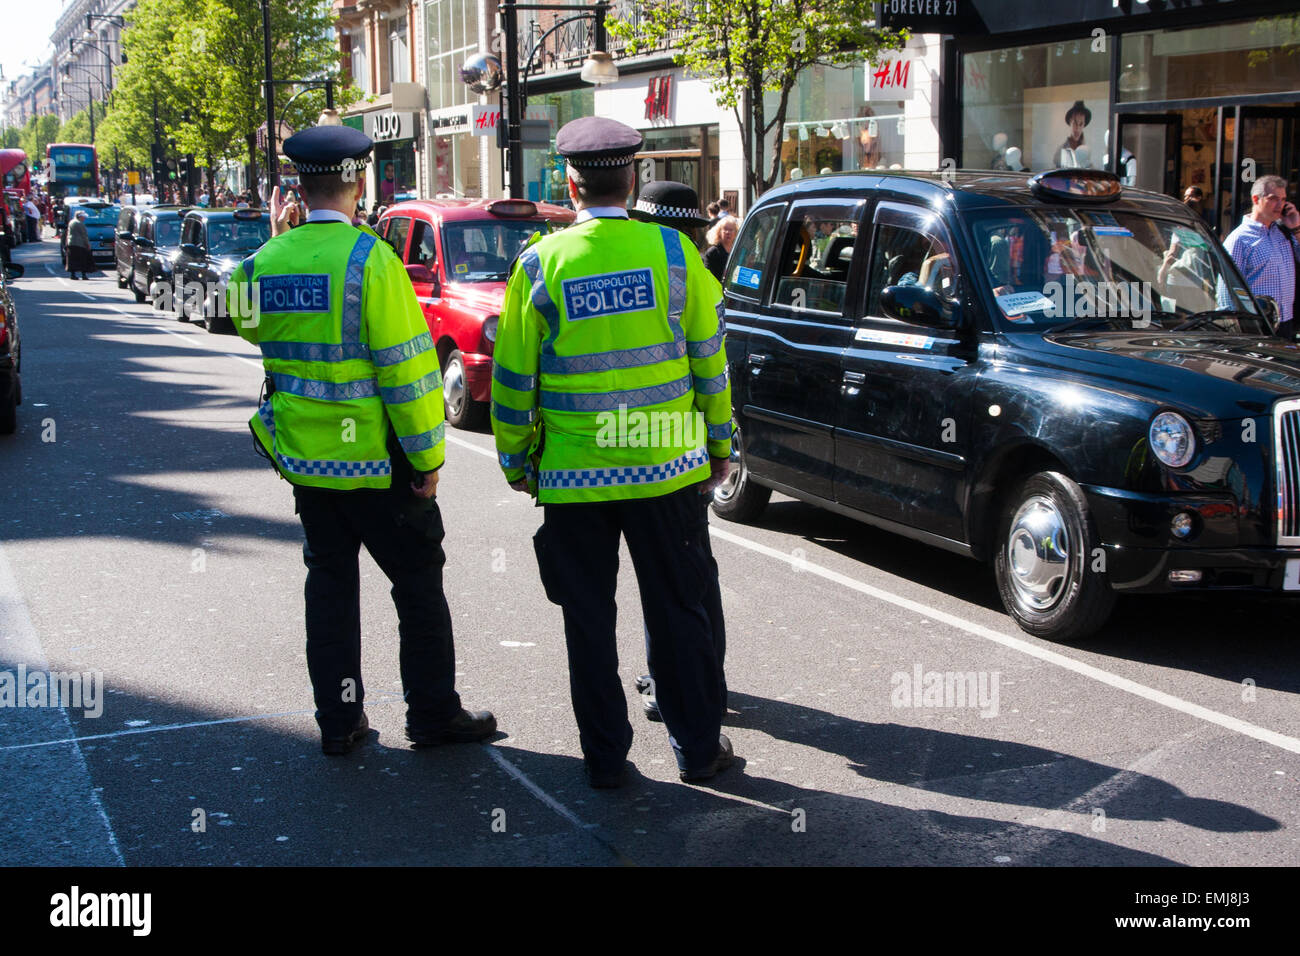 London, UK. 21st April, 2015. Hundreds of London black taxi operators bring traffic to a standstill as they protest on Oxford Street against what they say is Transport For London's failure to enforce their own regulations, allowing illegal minicabs to operate putting the public at risk and taking potential earnings from licenced operators. Credit:  Paul Davey/Alamy Live News Stock Photo